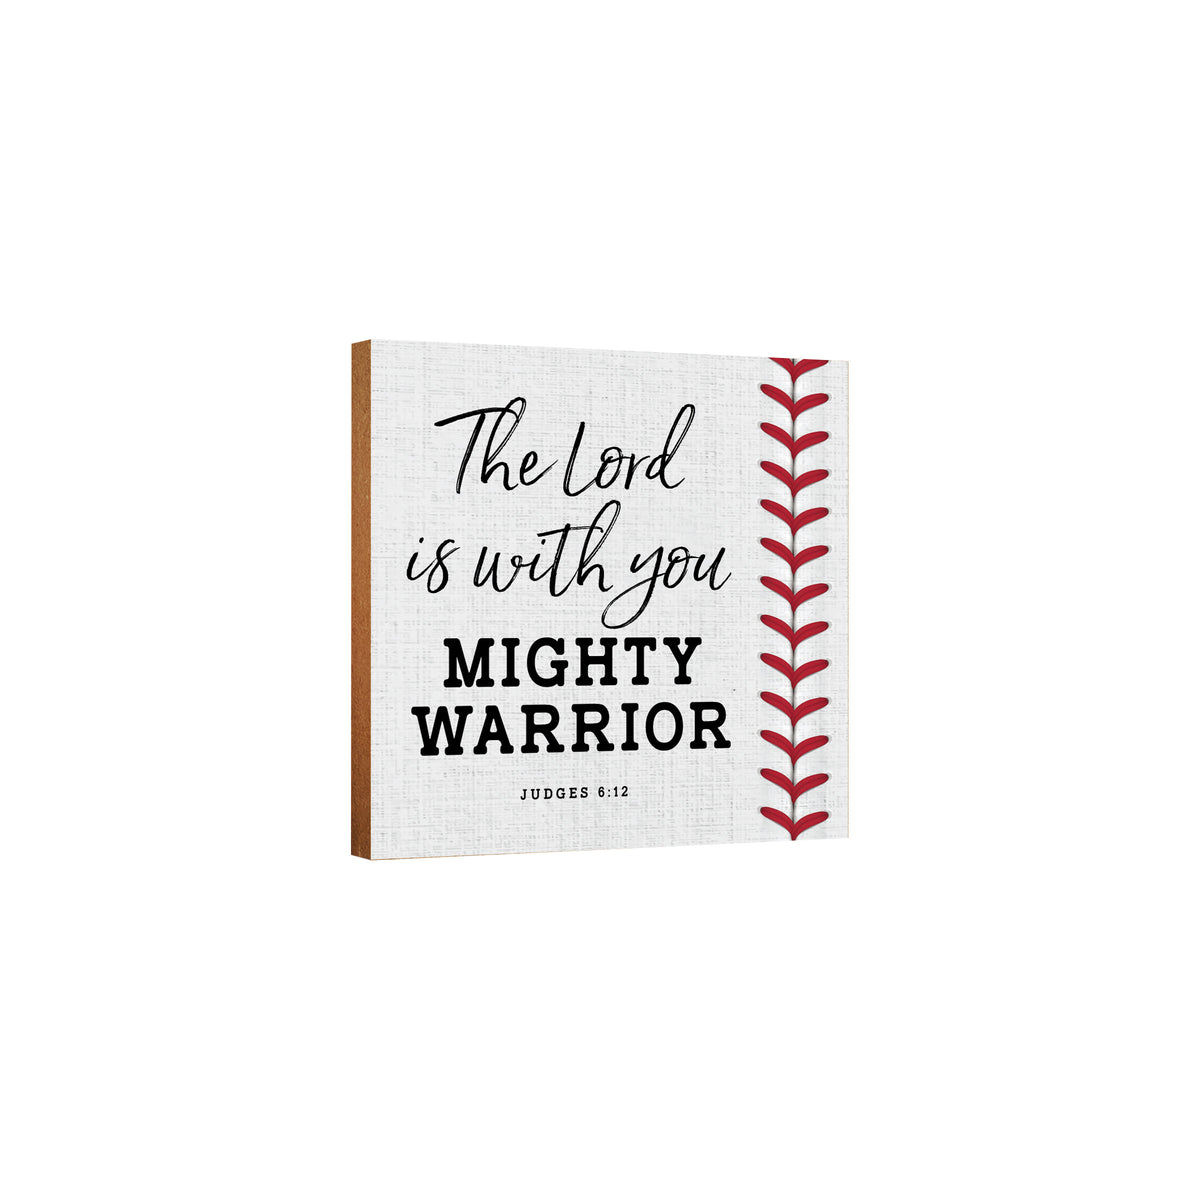 Rustic Wooden Baseball Shadow Box Shelf Décor With Inspiring Bible Verses - The Lord Is With You